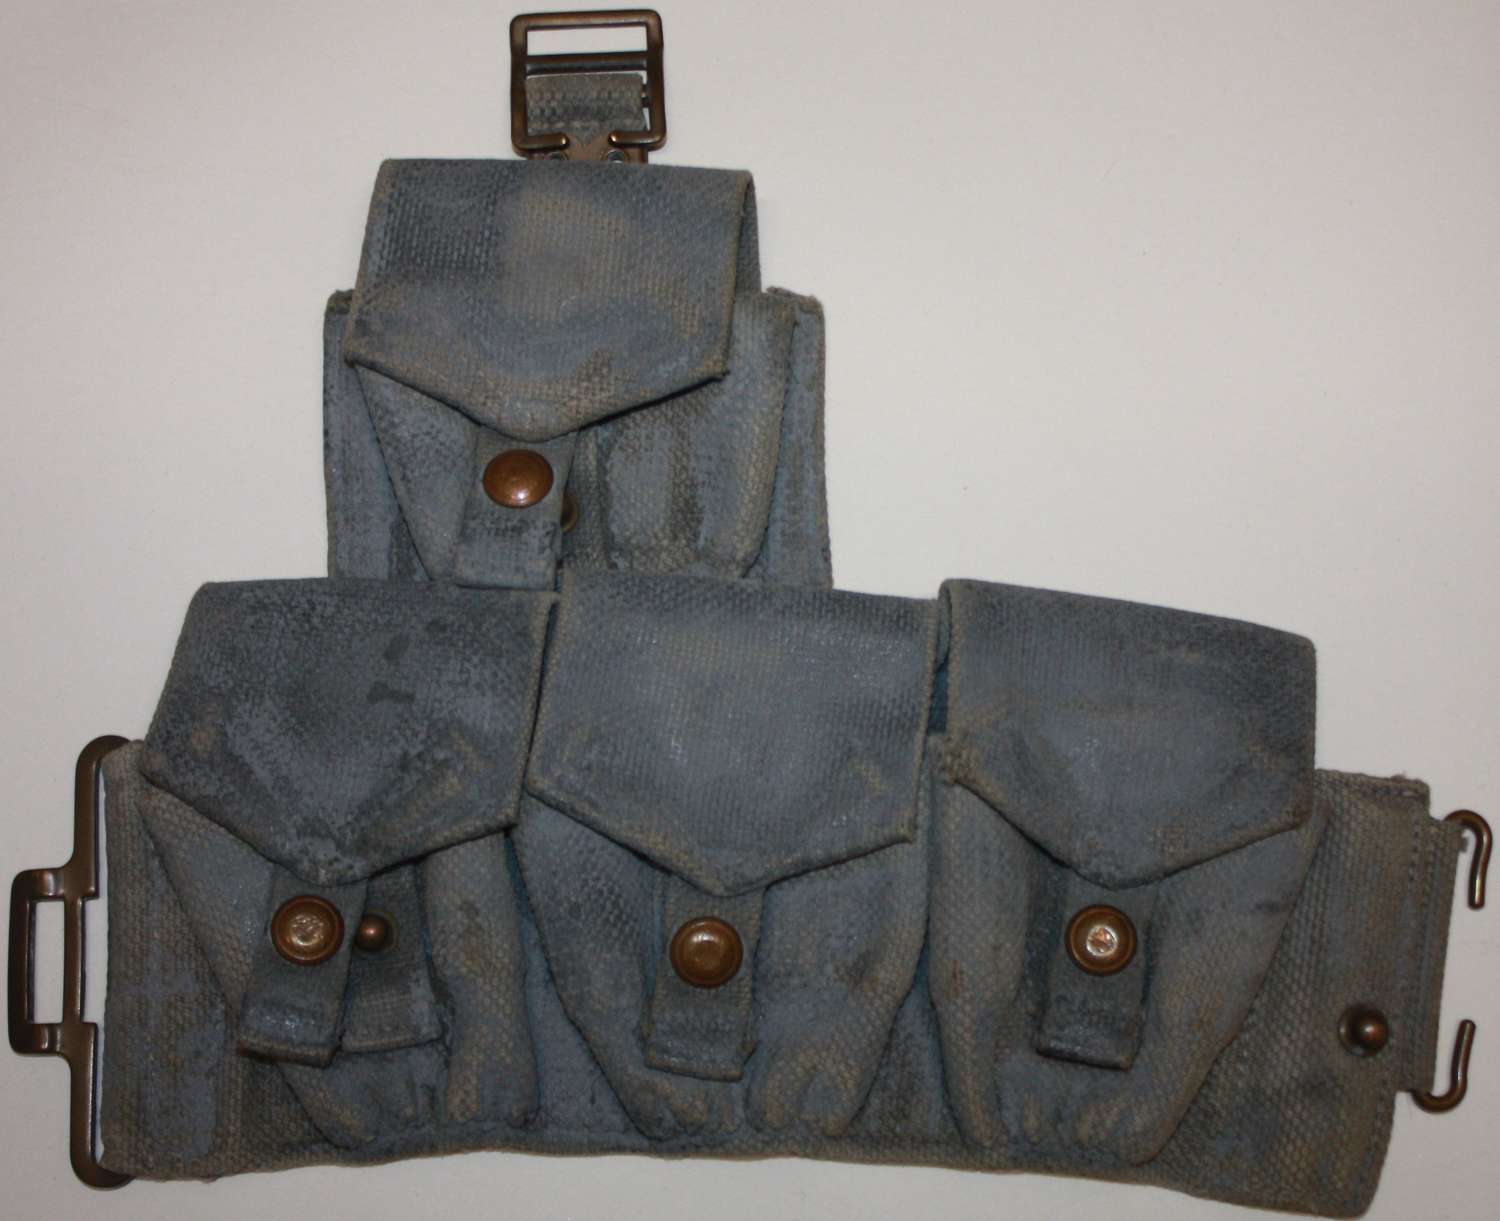 I AM LOOKING FOR A RAF RIGHT SIDE 4 POUCH 25 PATTERN AMMO POUCH POUCH